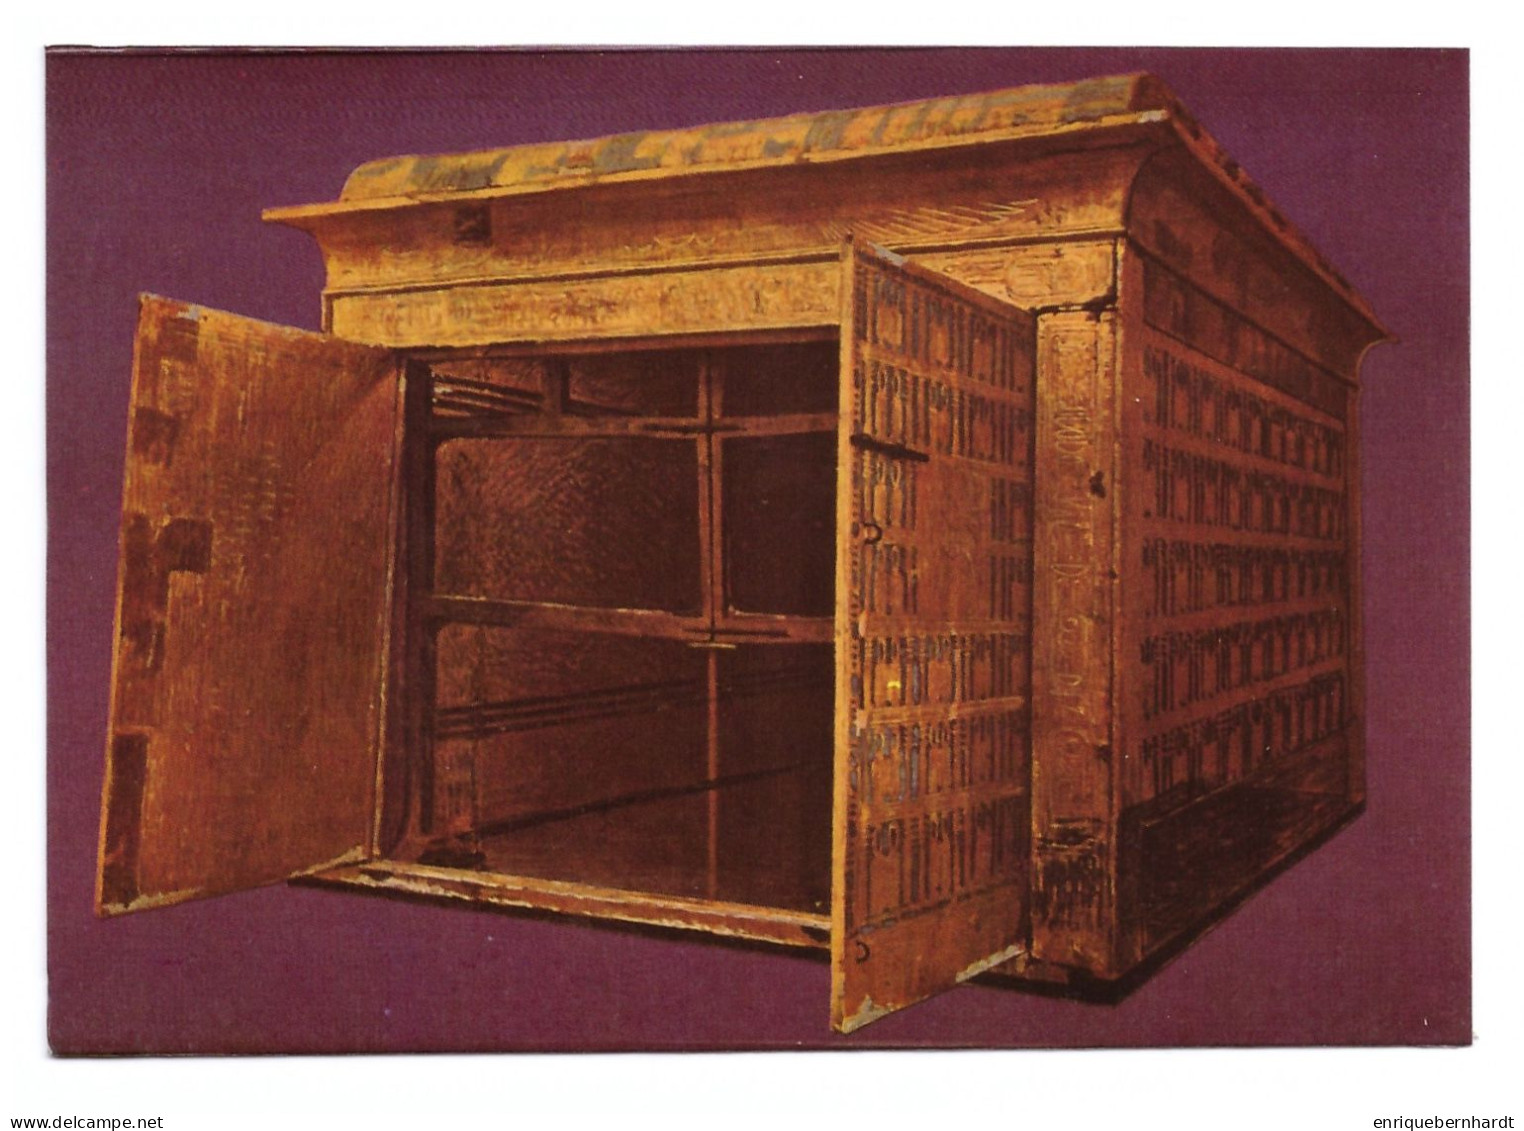 EGYPT // TUTANKHAMEN'S TREASURES - THE FIRST GREAT SHRINE OF WOOD COVERED WITH GILT STUCCO - Museums